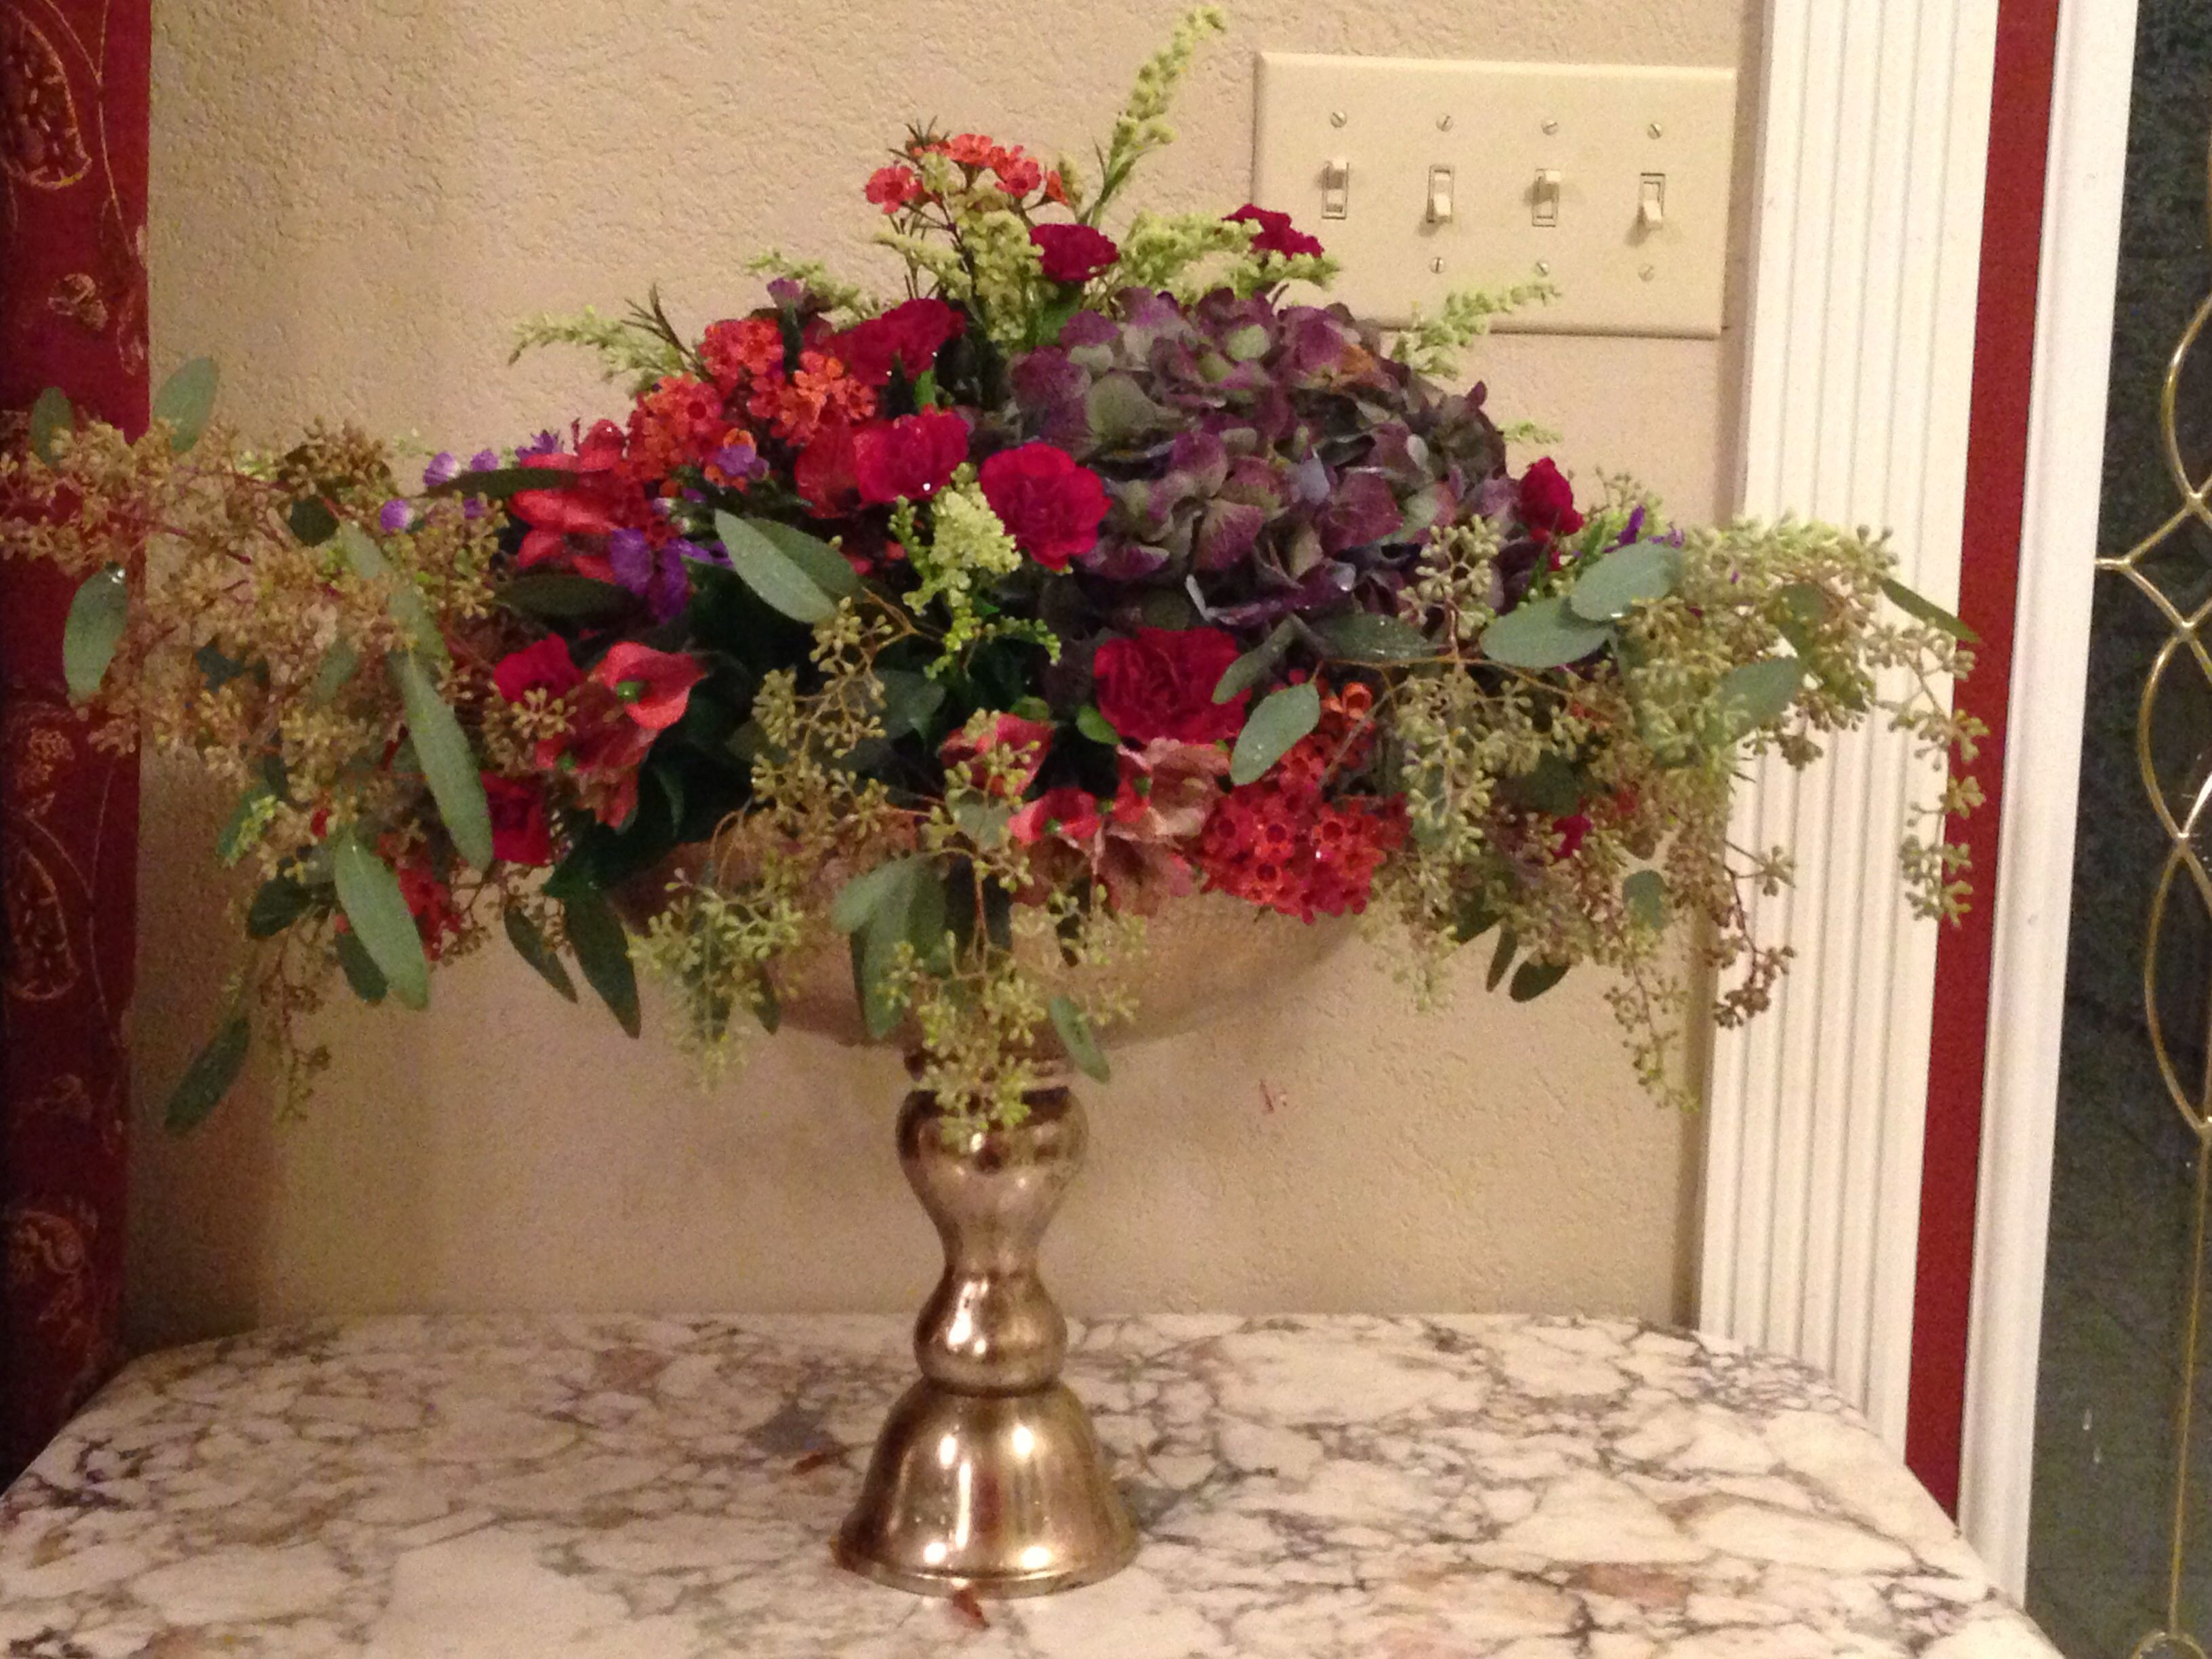 vase rentals los angeles of jewel tone floral design in gold compote by suebee floral design and with jewel tone floral design in gold compote by suebee floral design and rentals